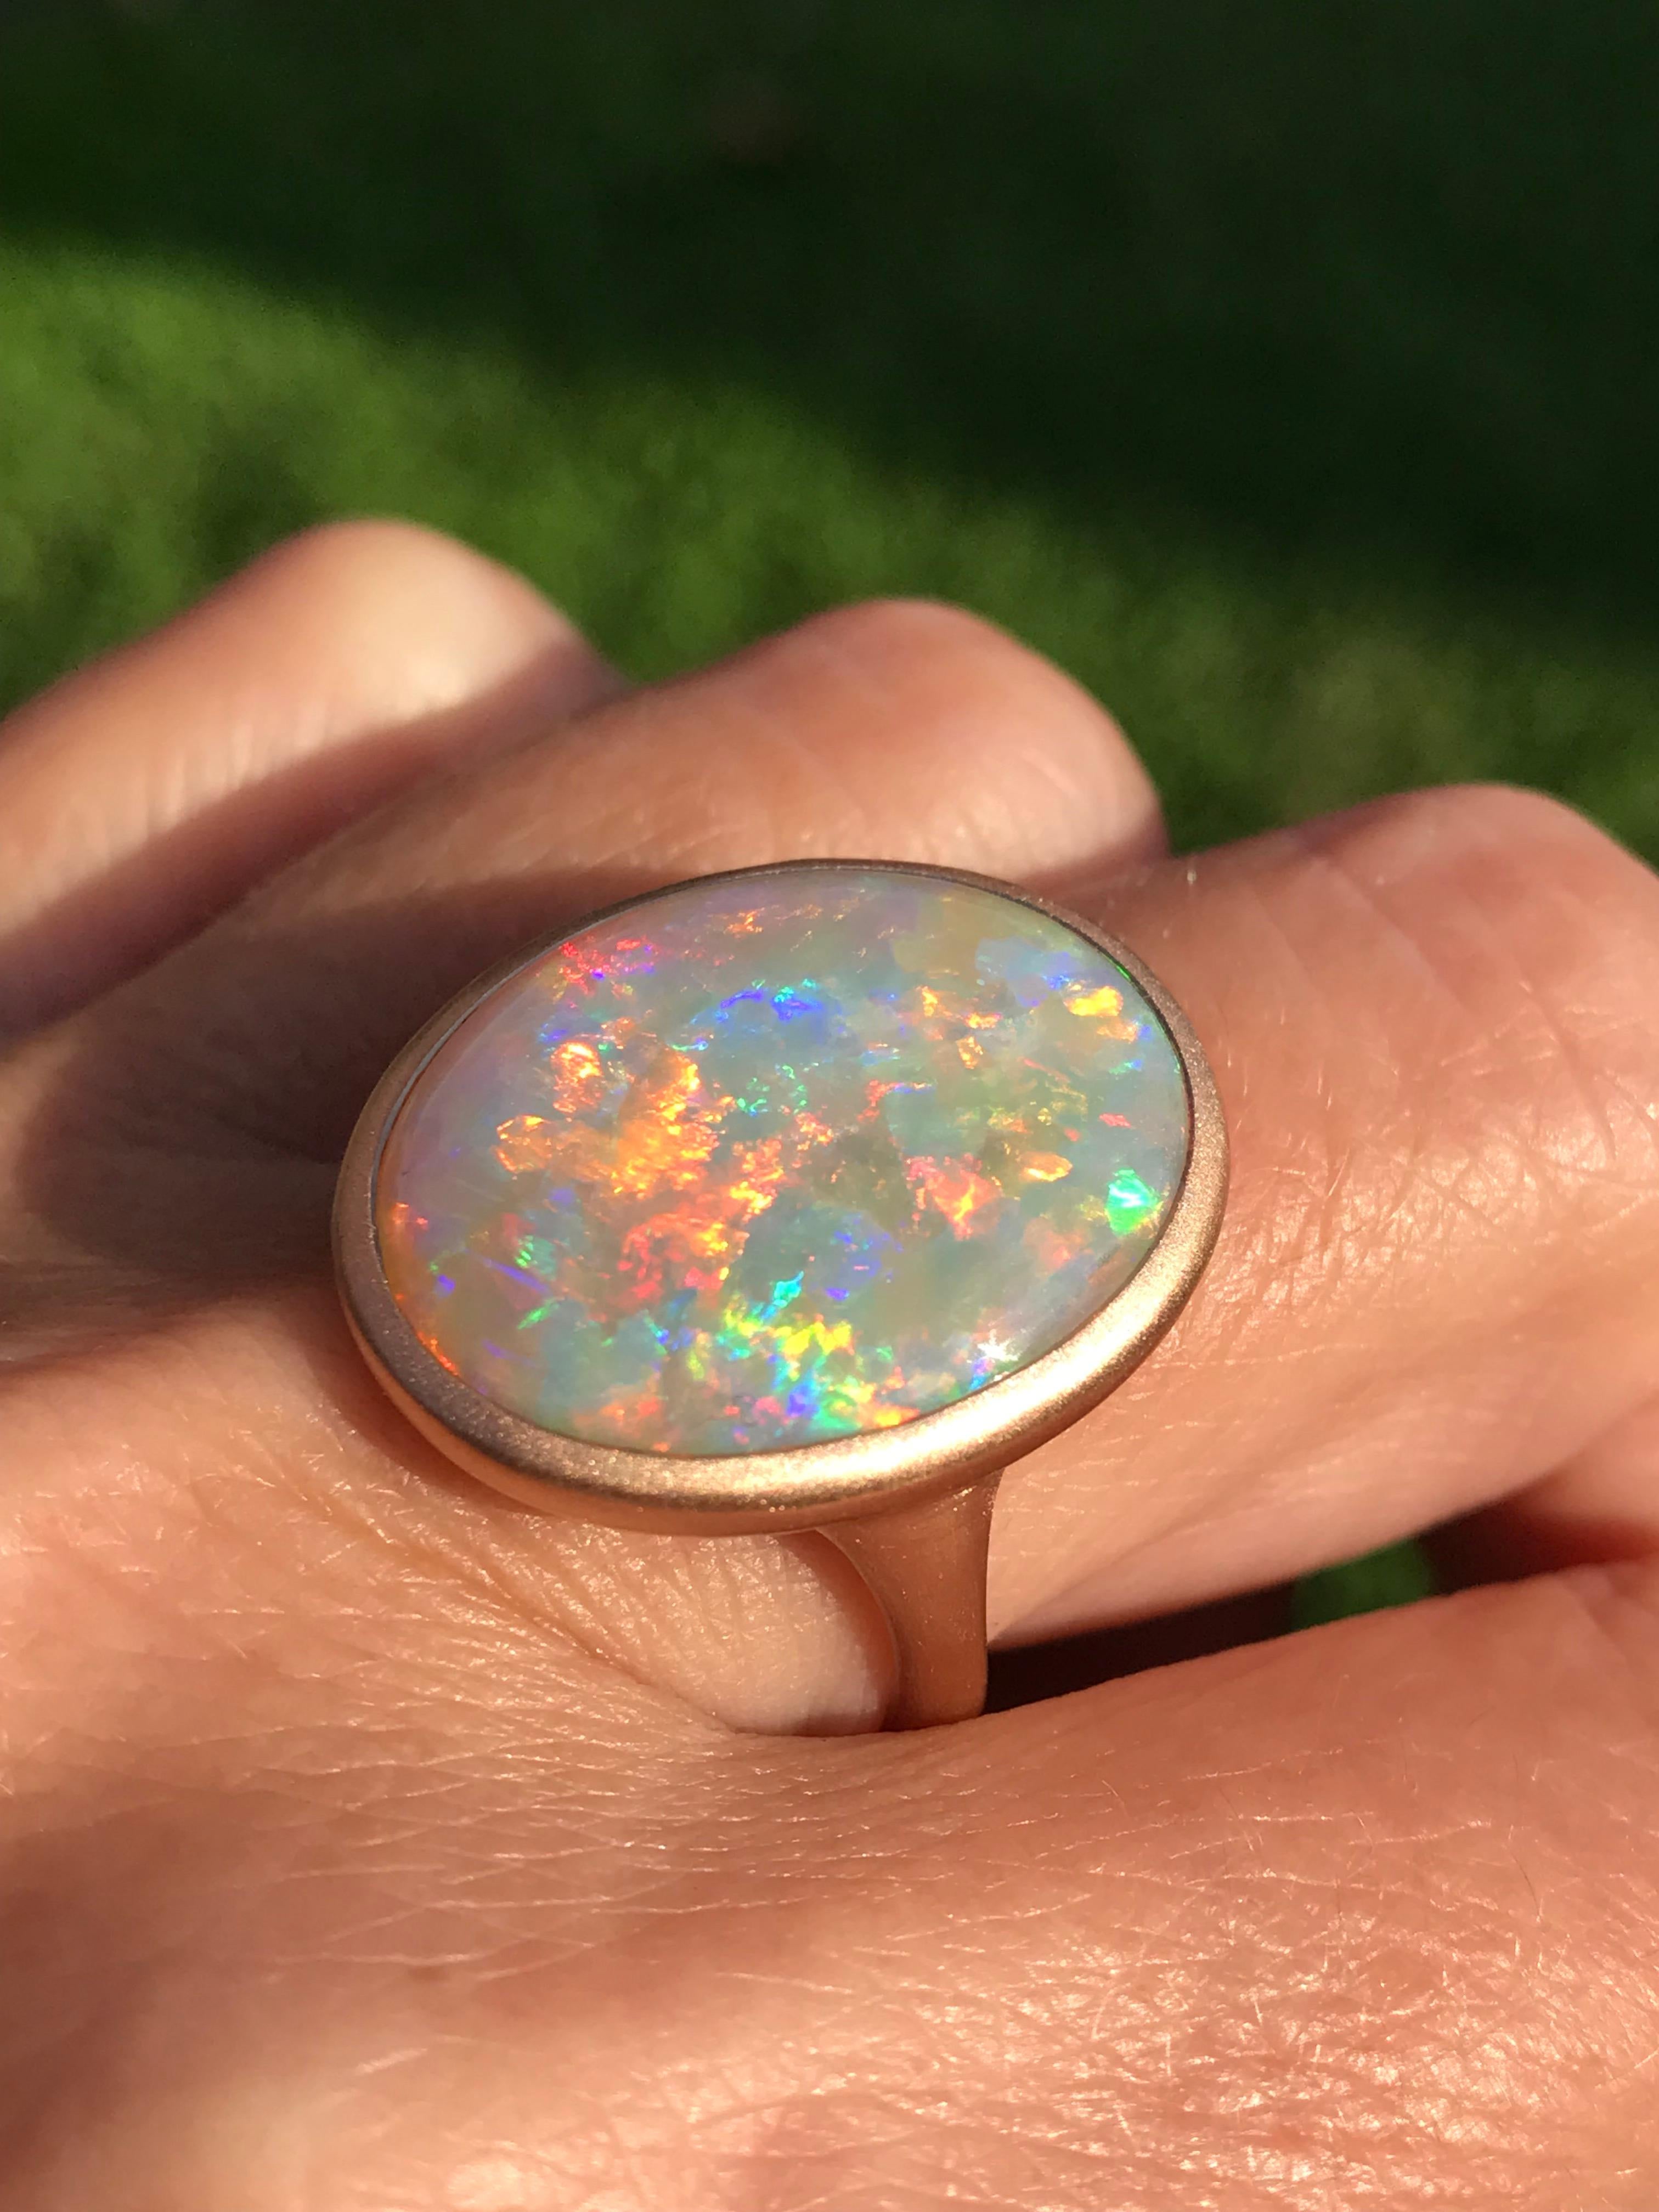 Dalben design 18k rose gold satin finishing ring with a  10,35 carat bezel-set oval shape magnificent Coober Pedy Australian crystal opal . 
This wonderful Australian Opal have a kaleidoscope of dazzling colors.
Ring size US  7 1/2 - EU 55